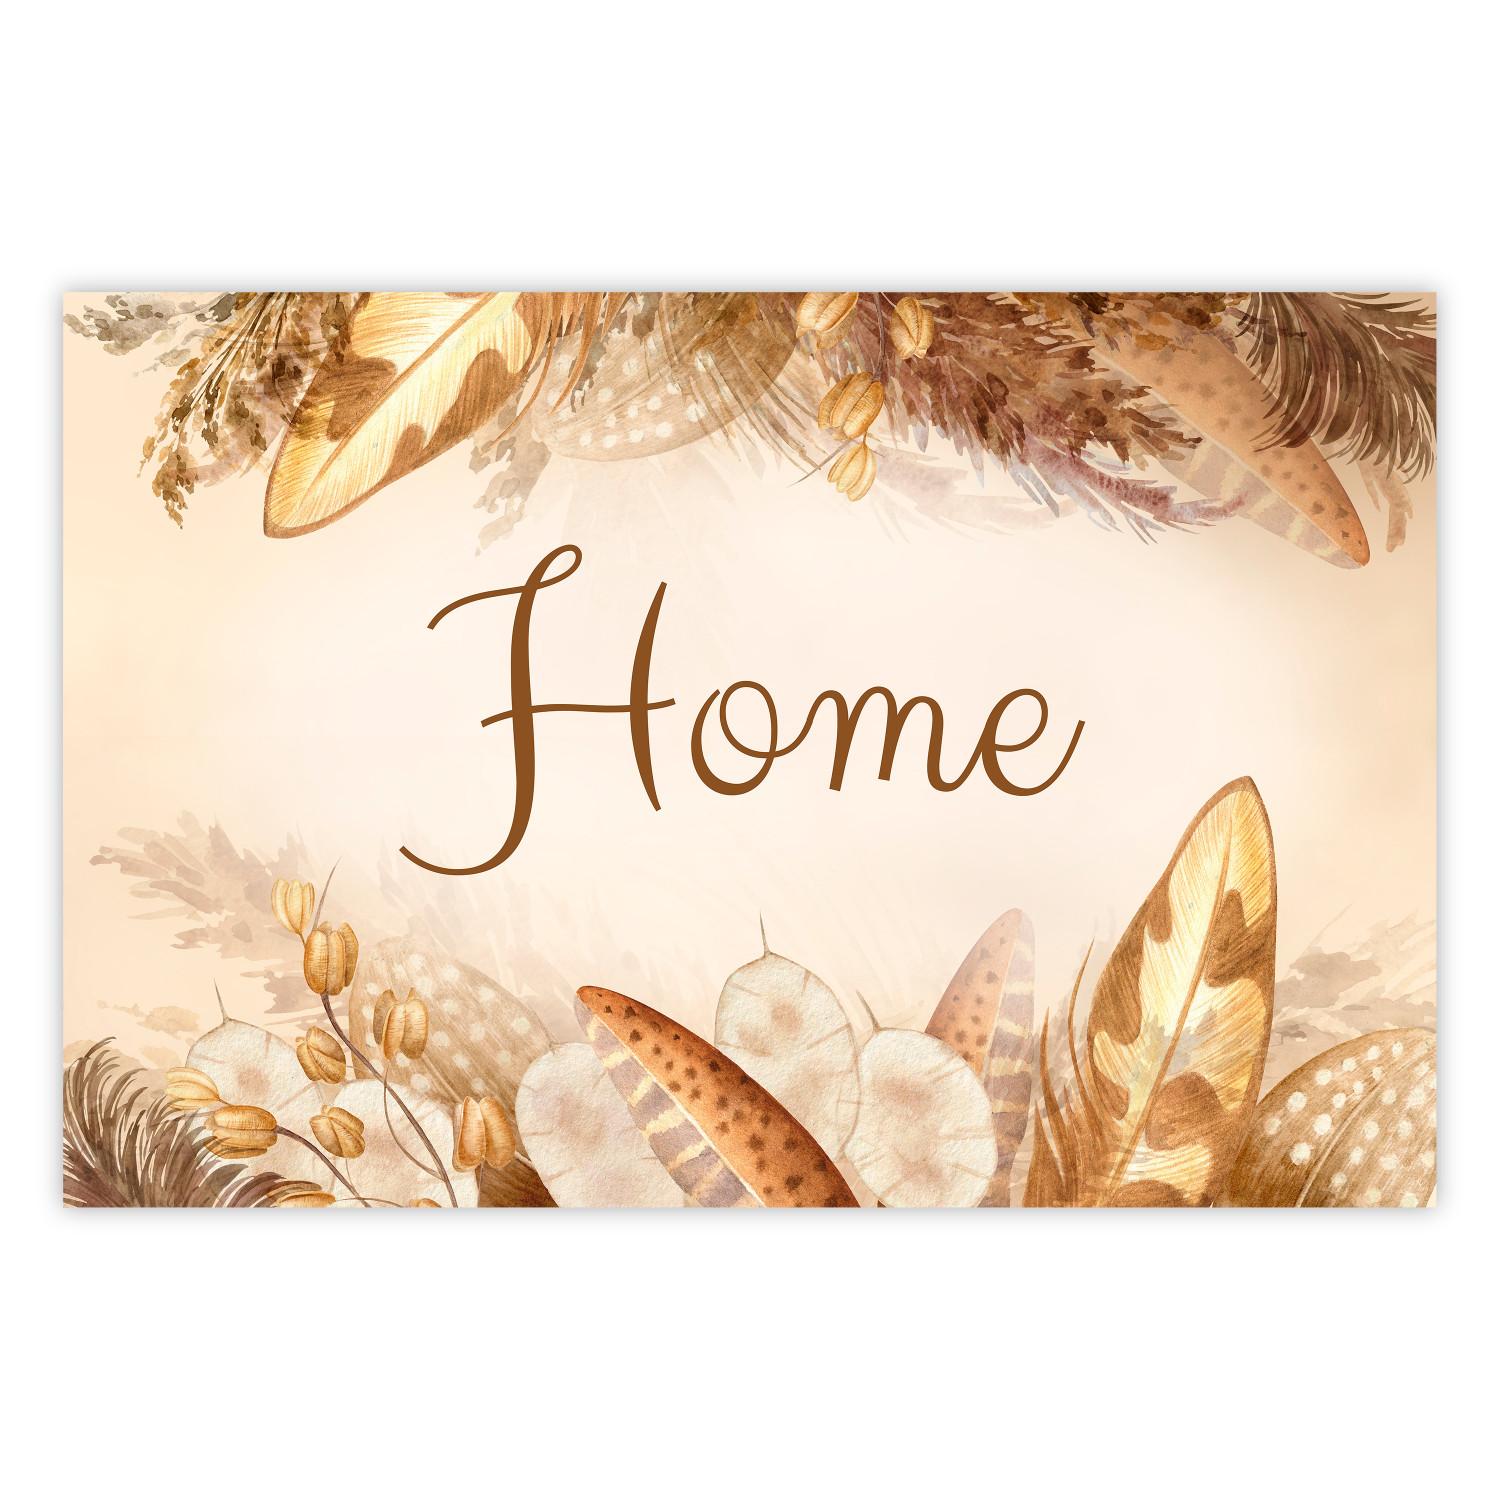 Cartel Home - Inscription Among Dried Plants and Feathers in Warm Boho Shades